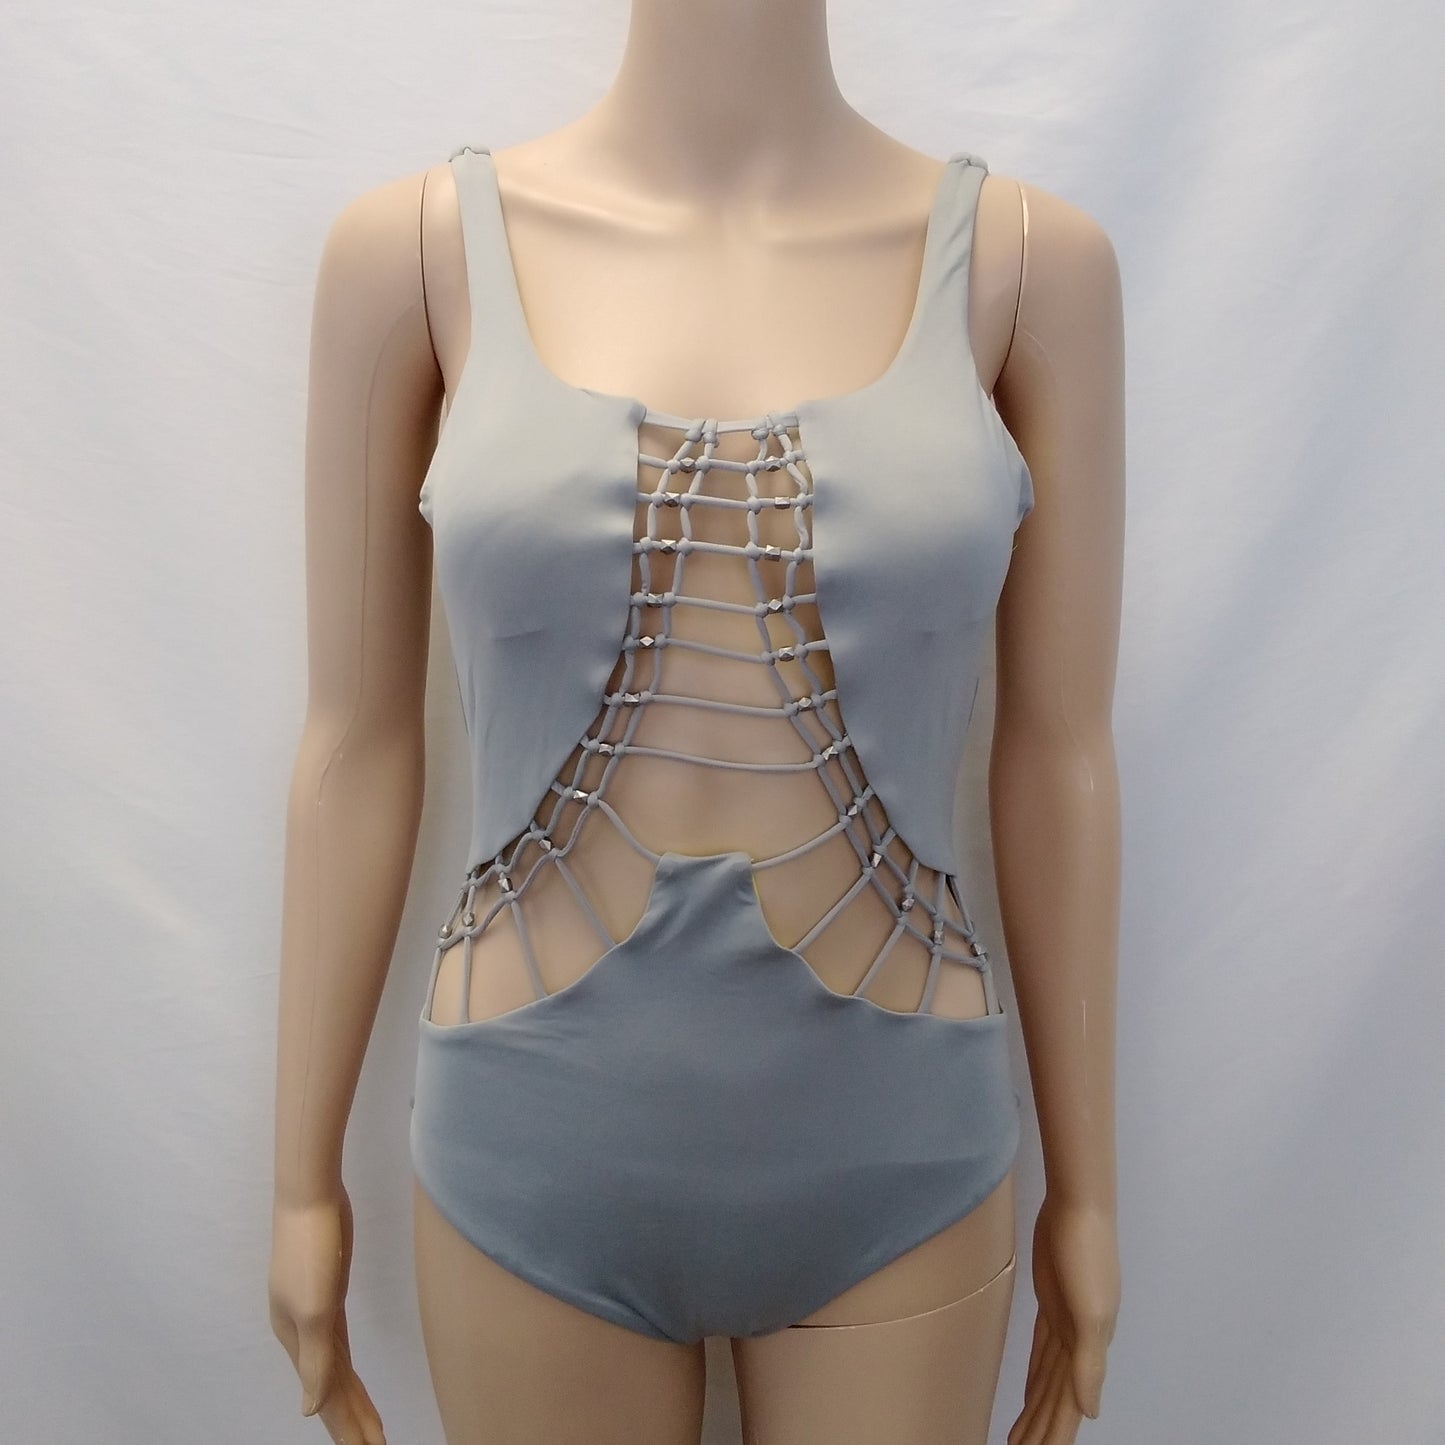 NWT - Dolce Vita One-piece Cement Bathing Suit With Cf Macrame - Size: M (US8)